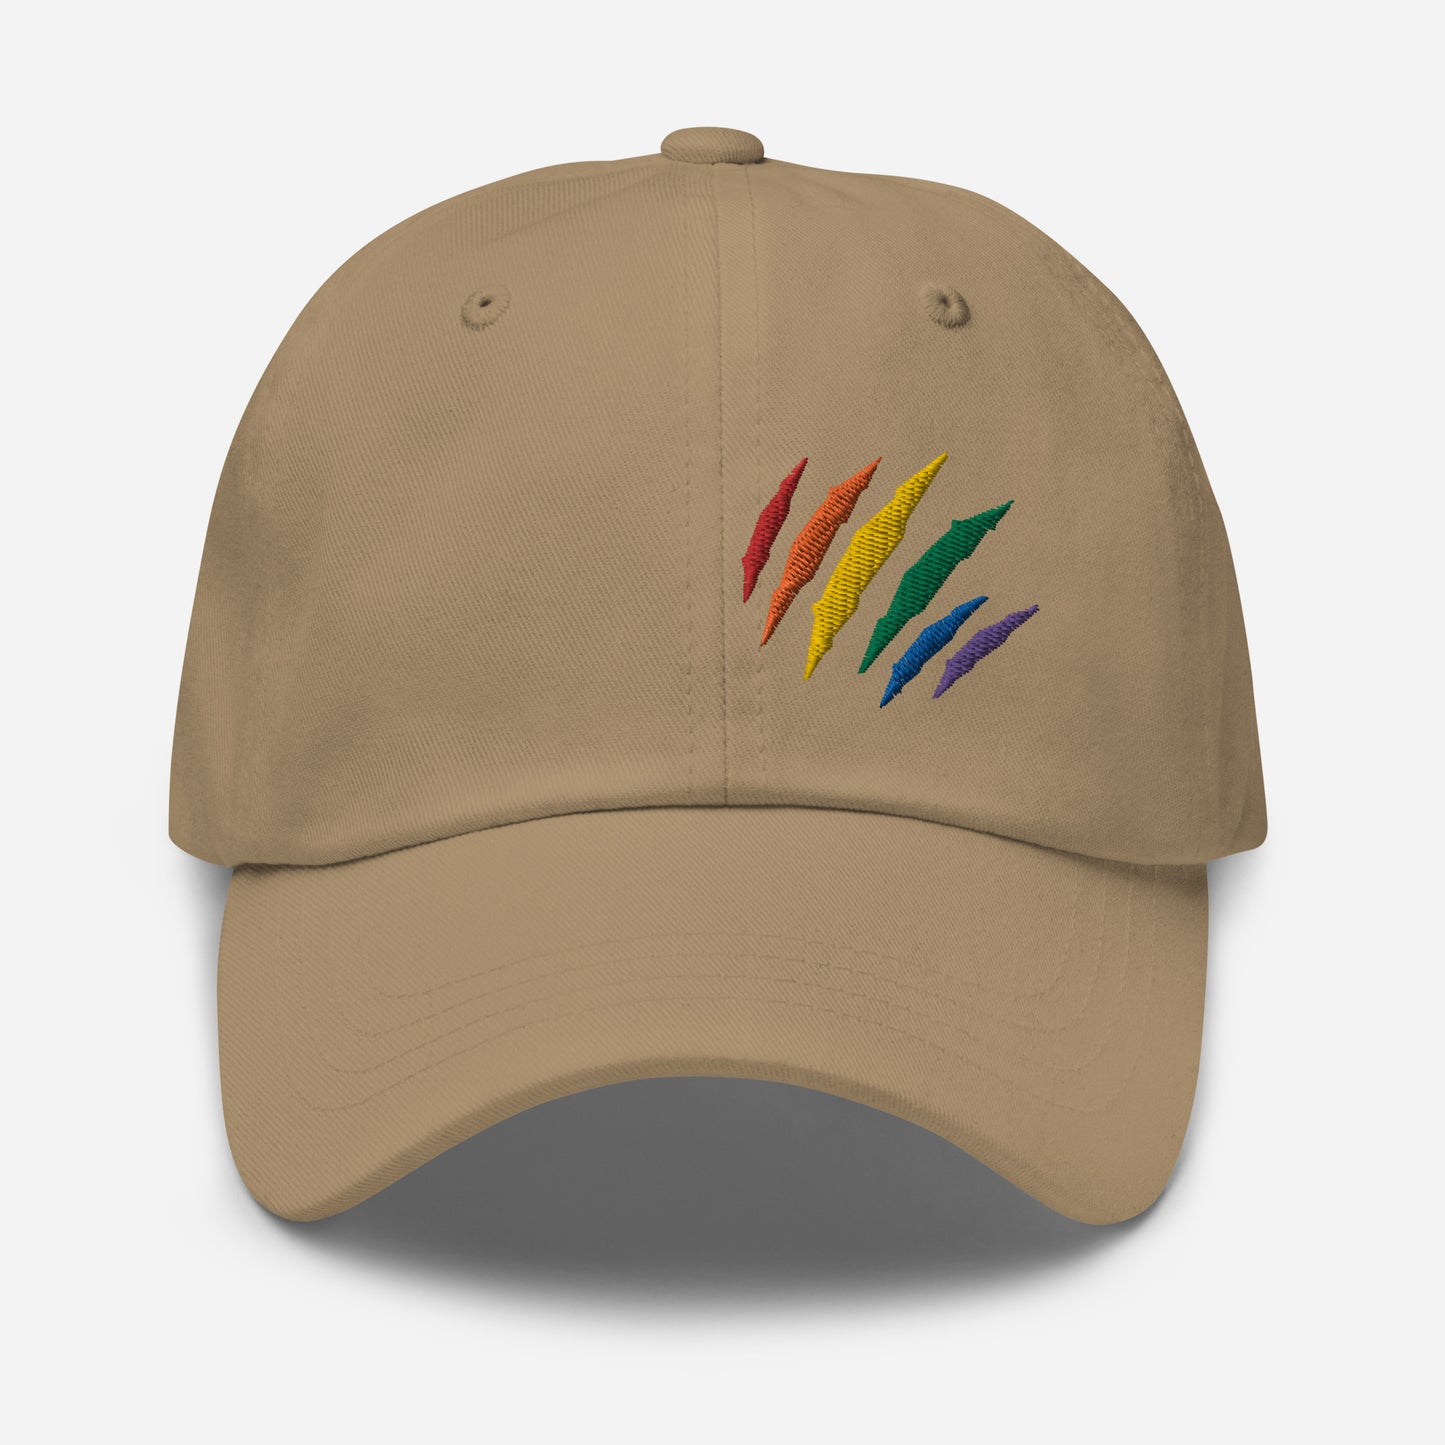 Khaki baseball hat featuring rainbow pride scratch mark embroidery with a low profile, adjustable strap.